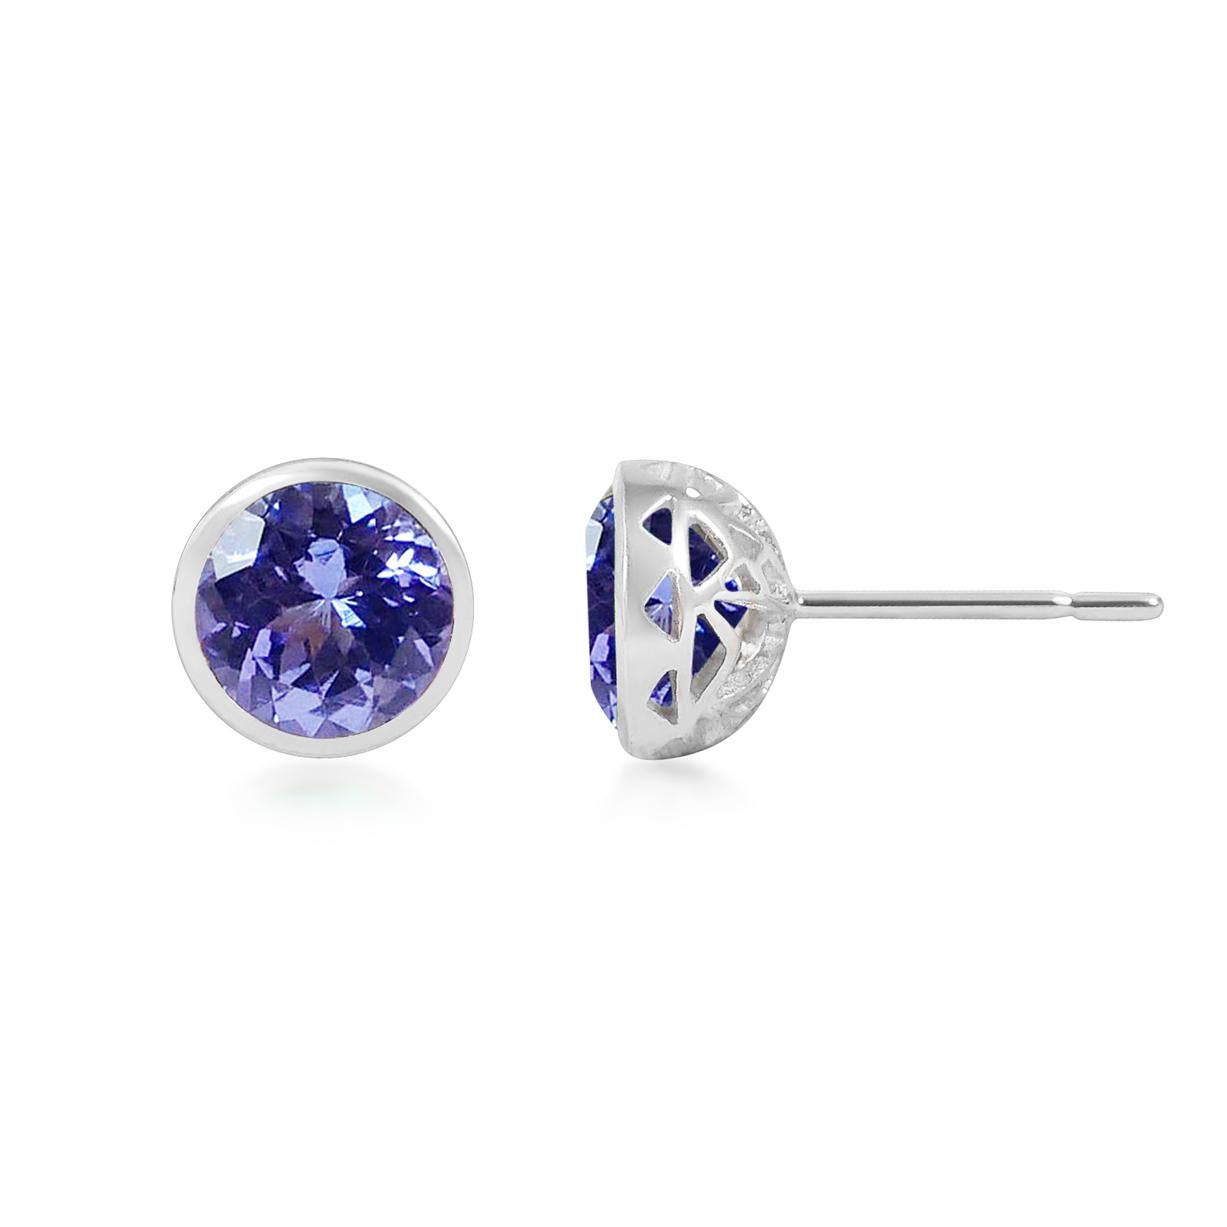 Brilliant Cut Handcrafted 2.80 Carats Tanzanite 18 Karat White Gold Stud Earrings For Sale